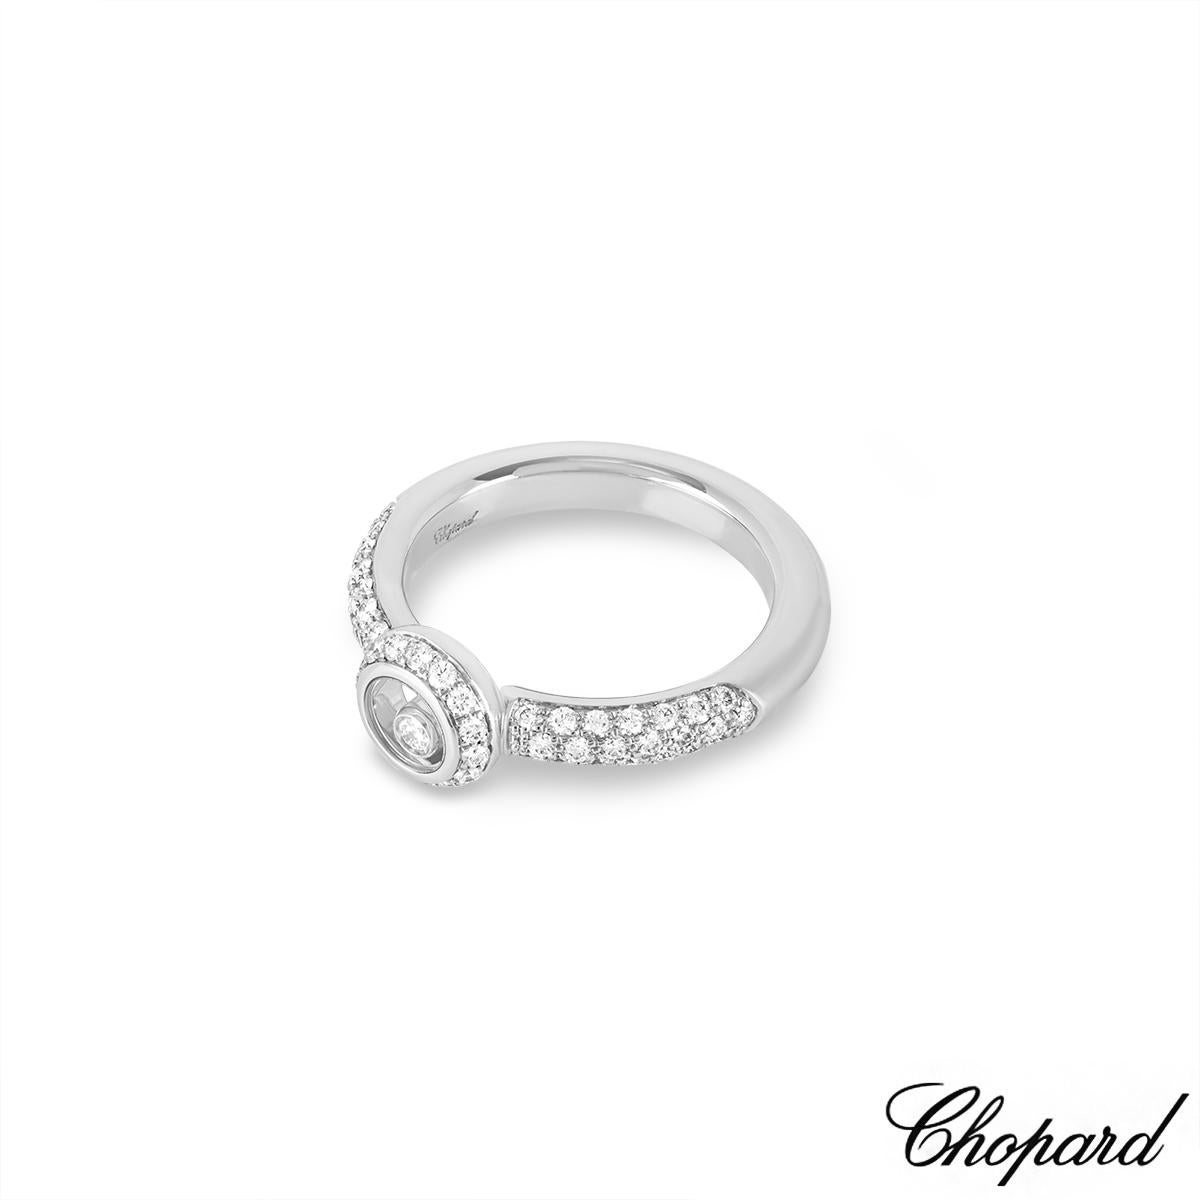 Chopard White Gold Happy Diamonds Ring 82/2902-1109 In New Condition For Sale In London, GB